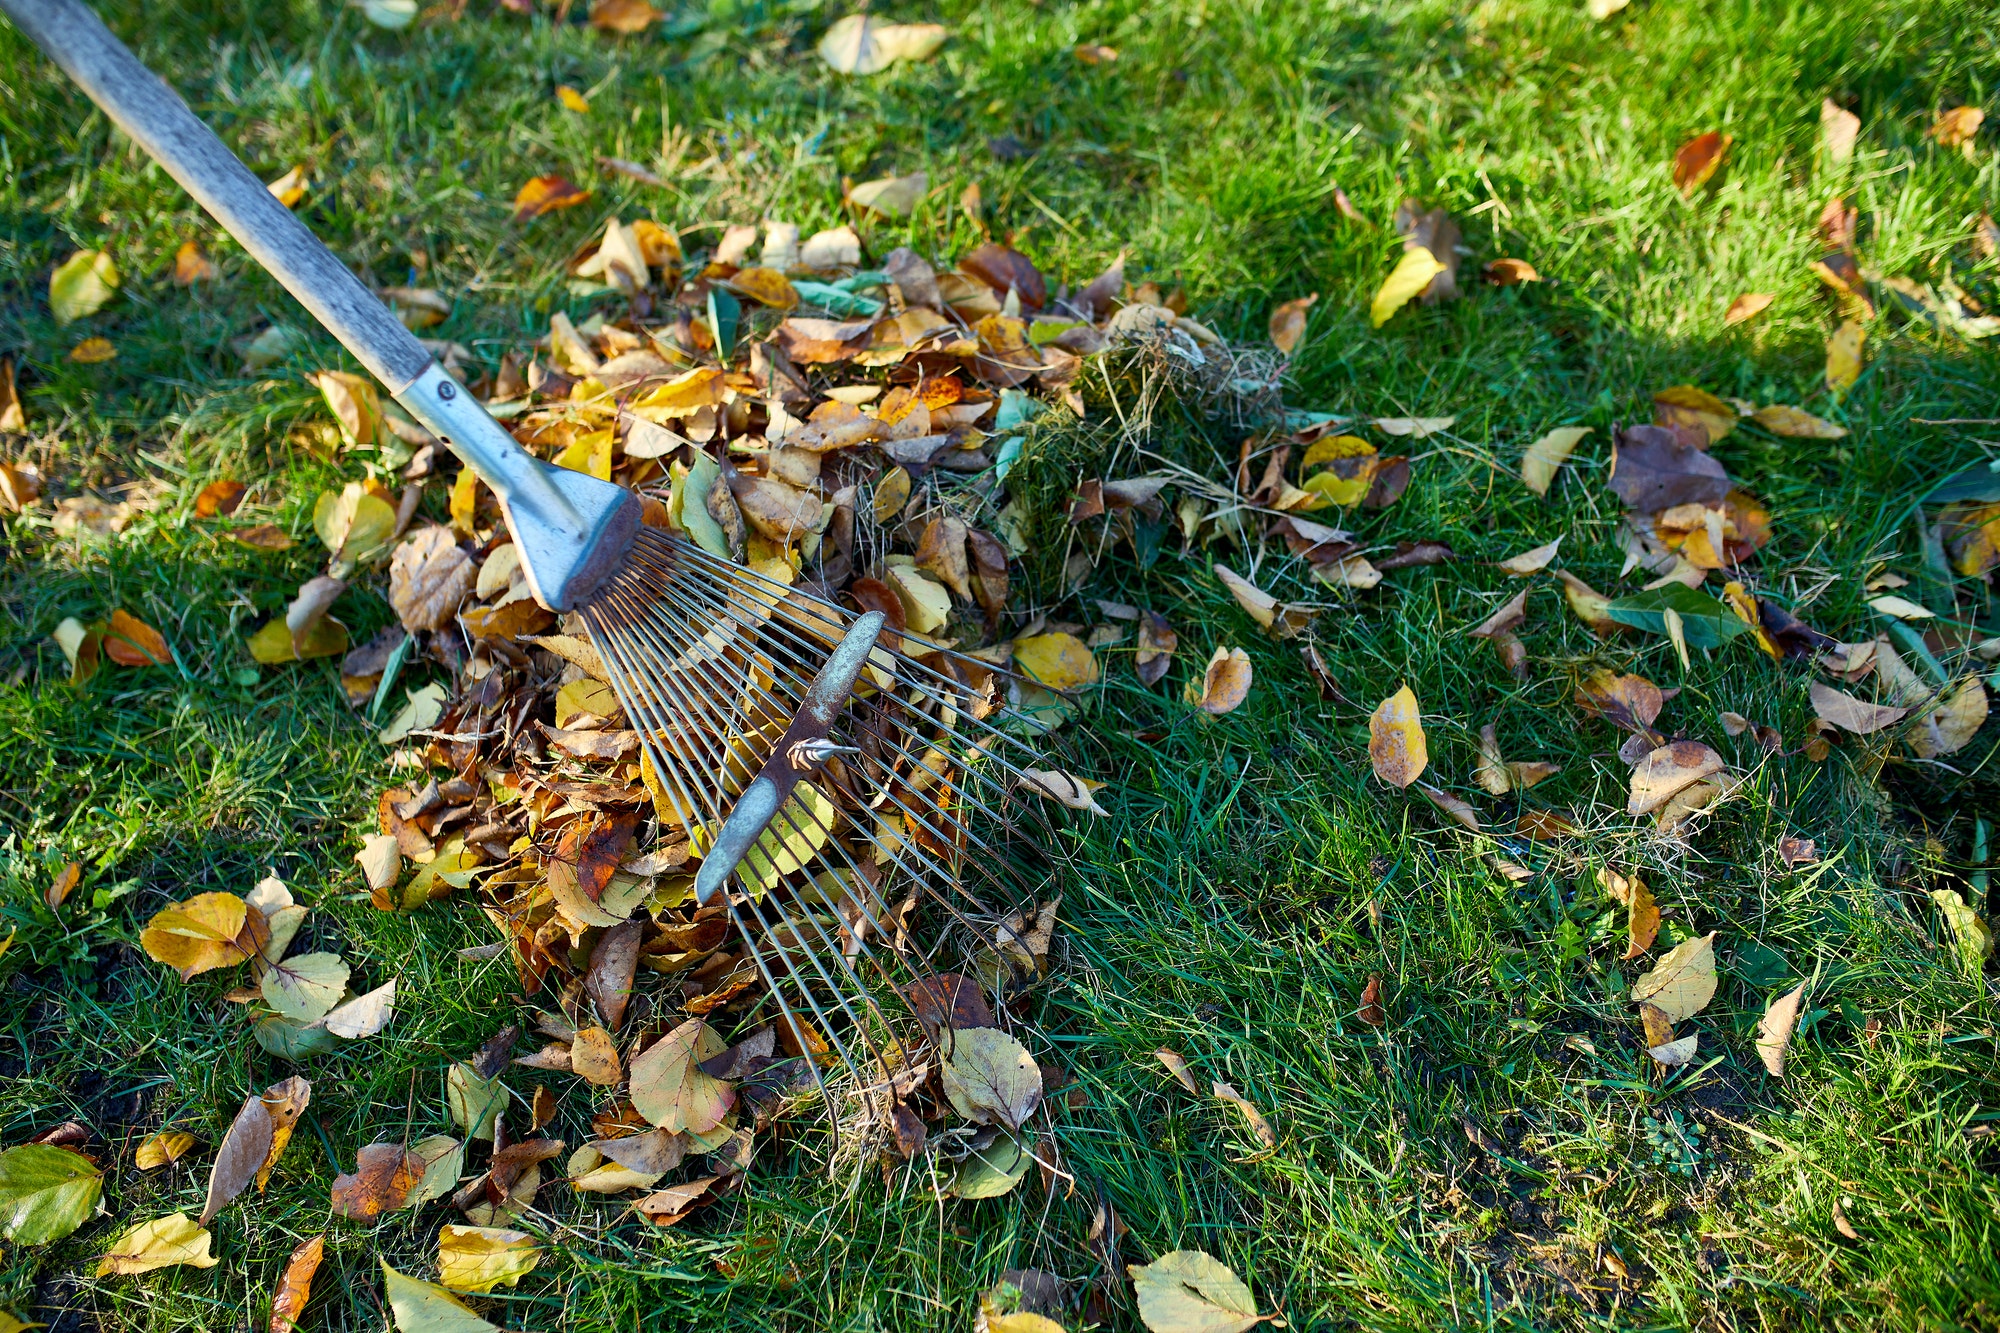 Old red rake in a pile of fall maple leaves, Raking autumn leaves on grass lawn